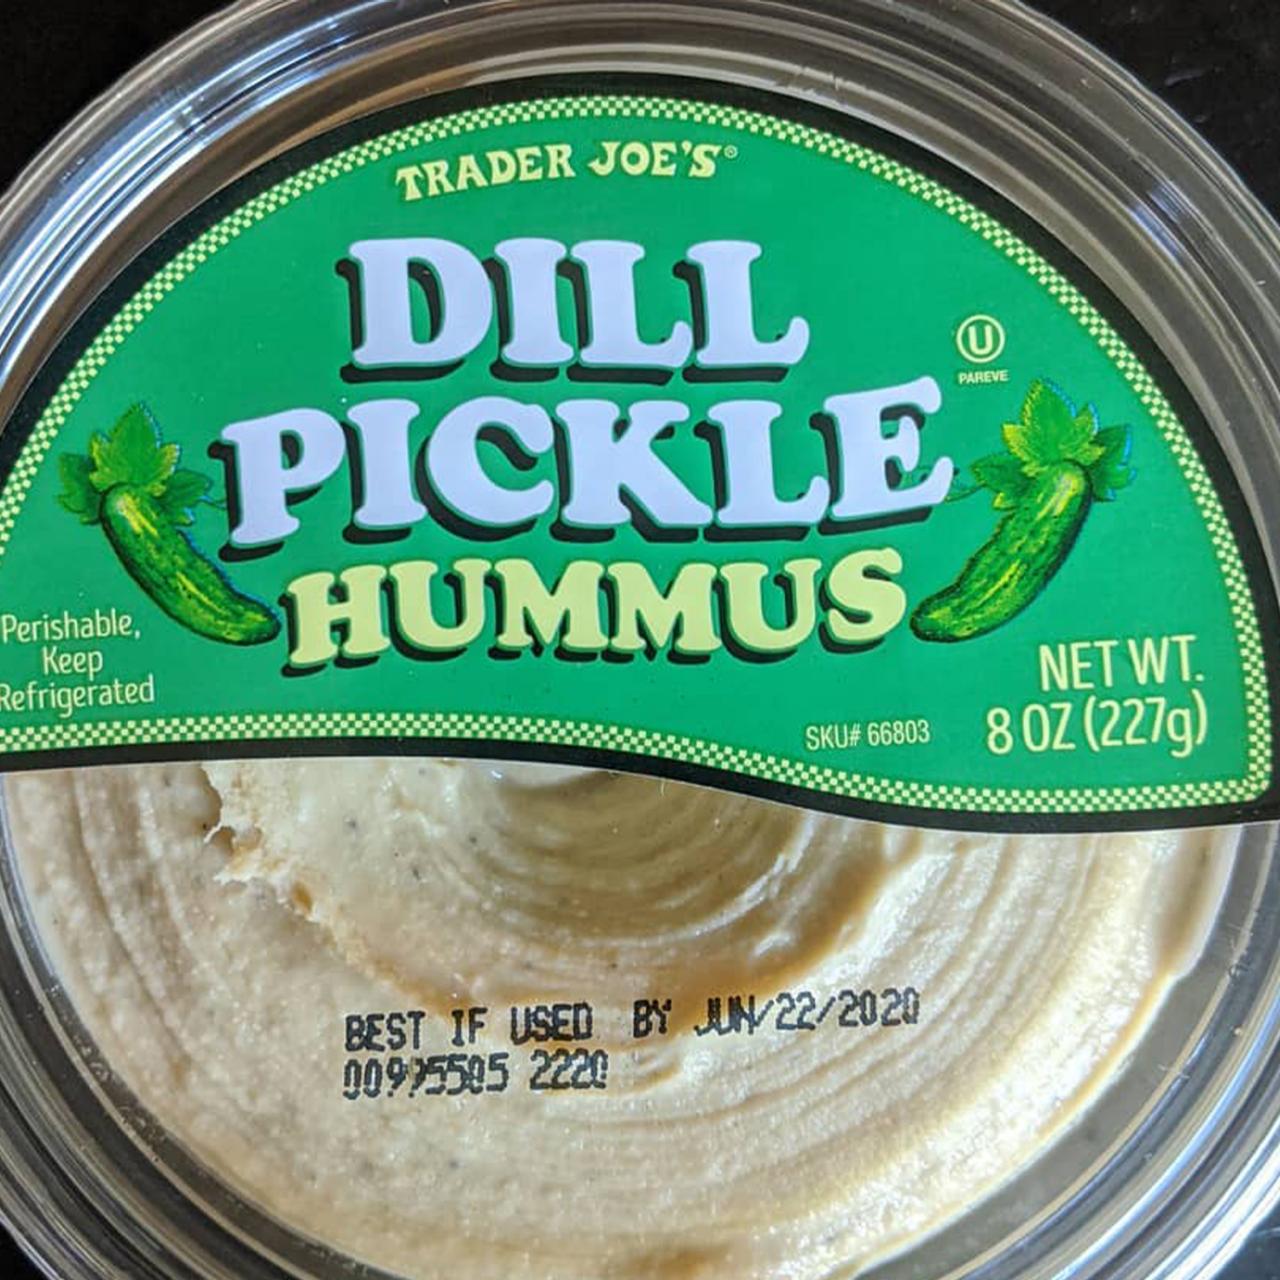 The Best Pickle-Flavored Products at Trader Joe's